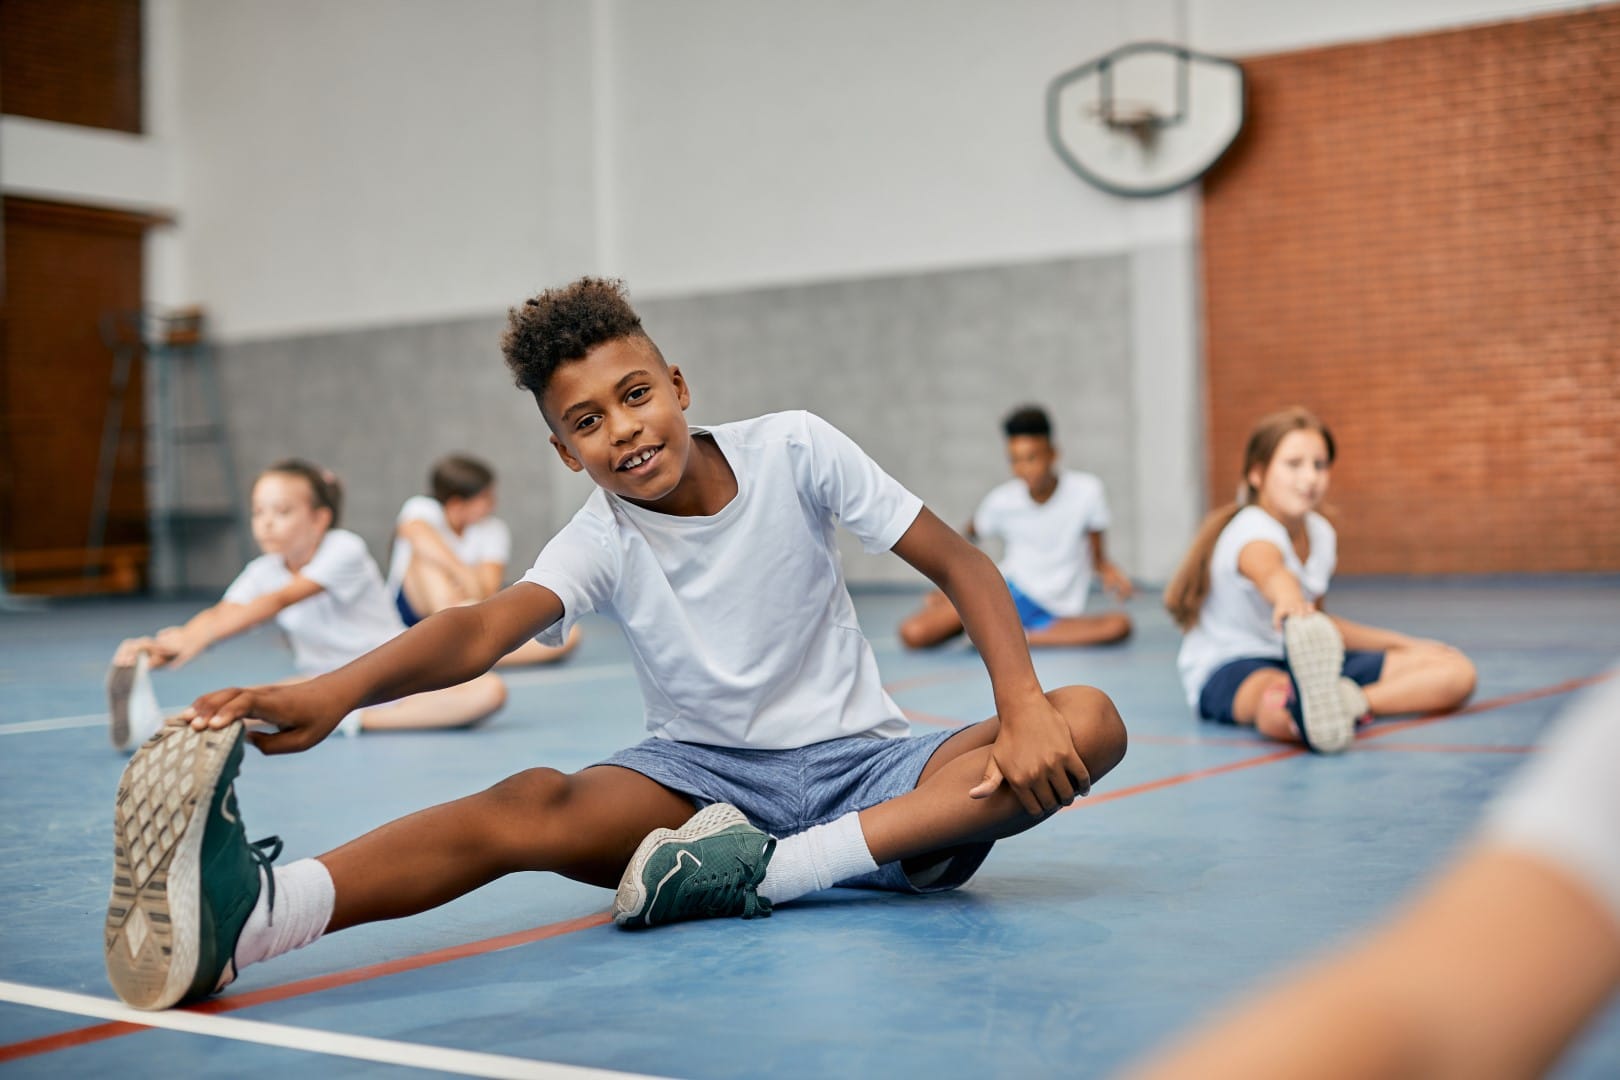 Happy black elementary student stretching his leg while warming up during physical education class at school gym and looking at camera.